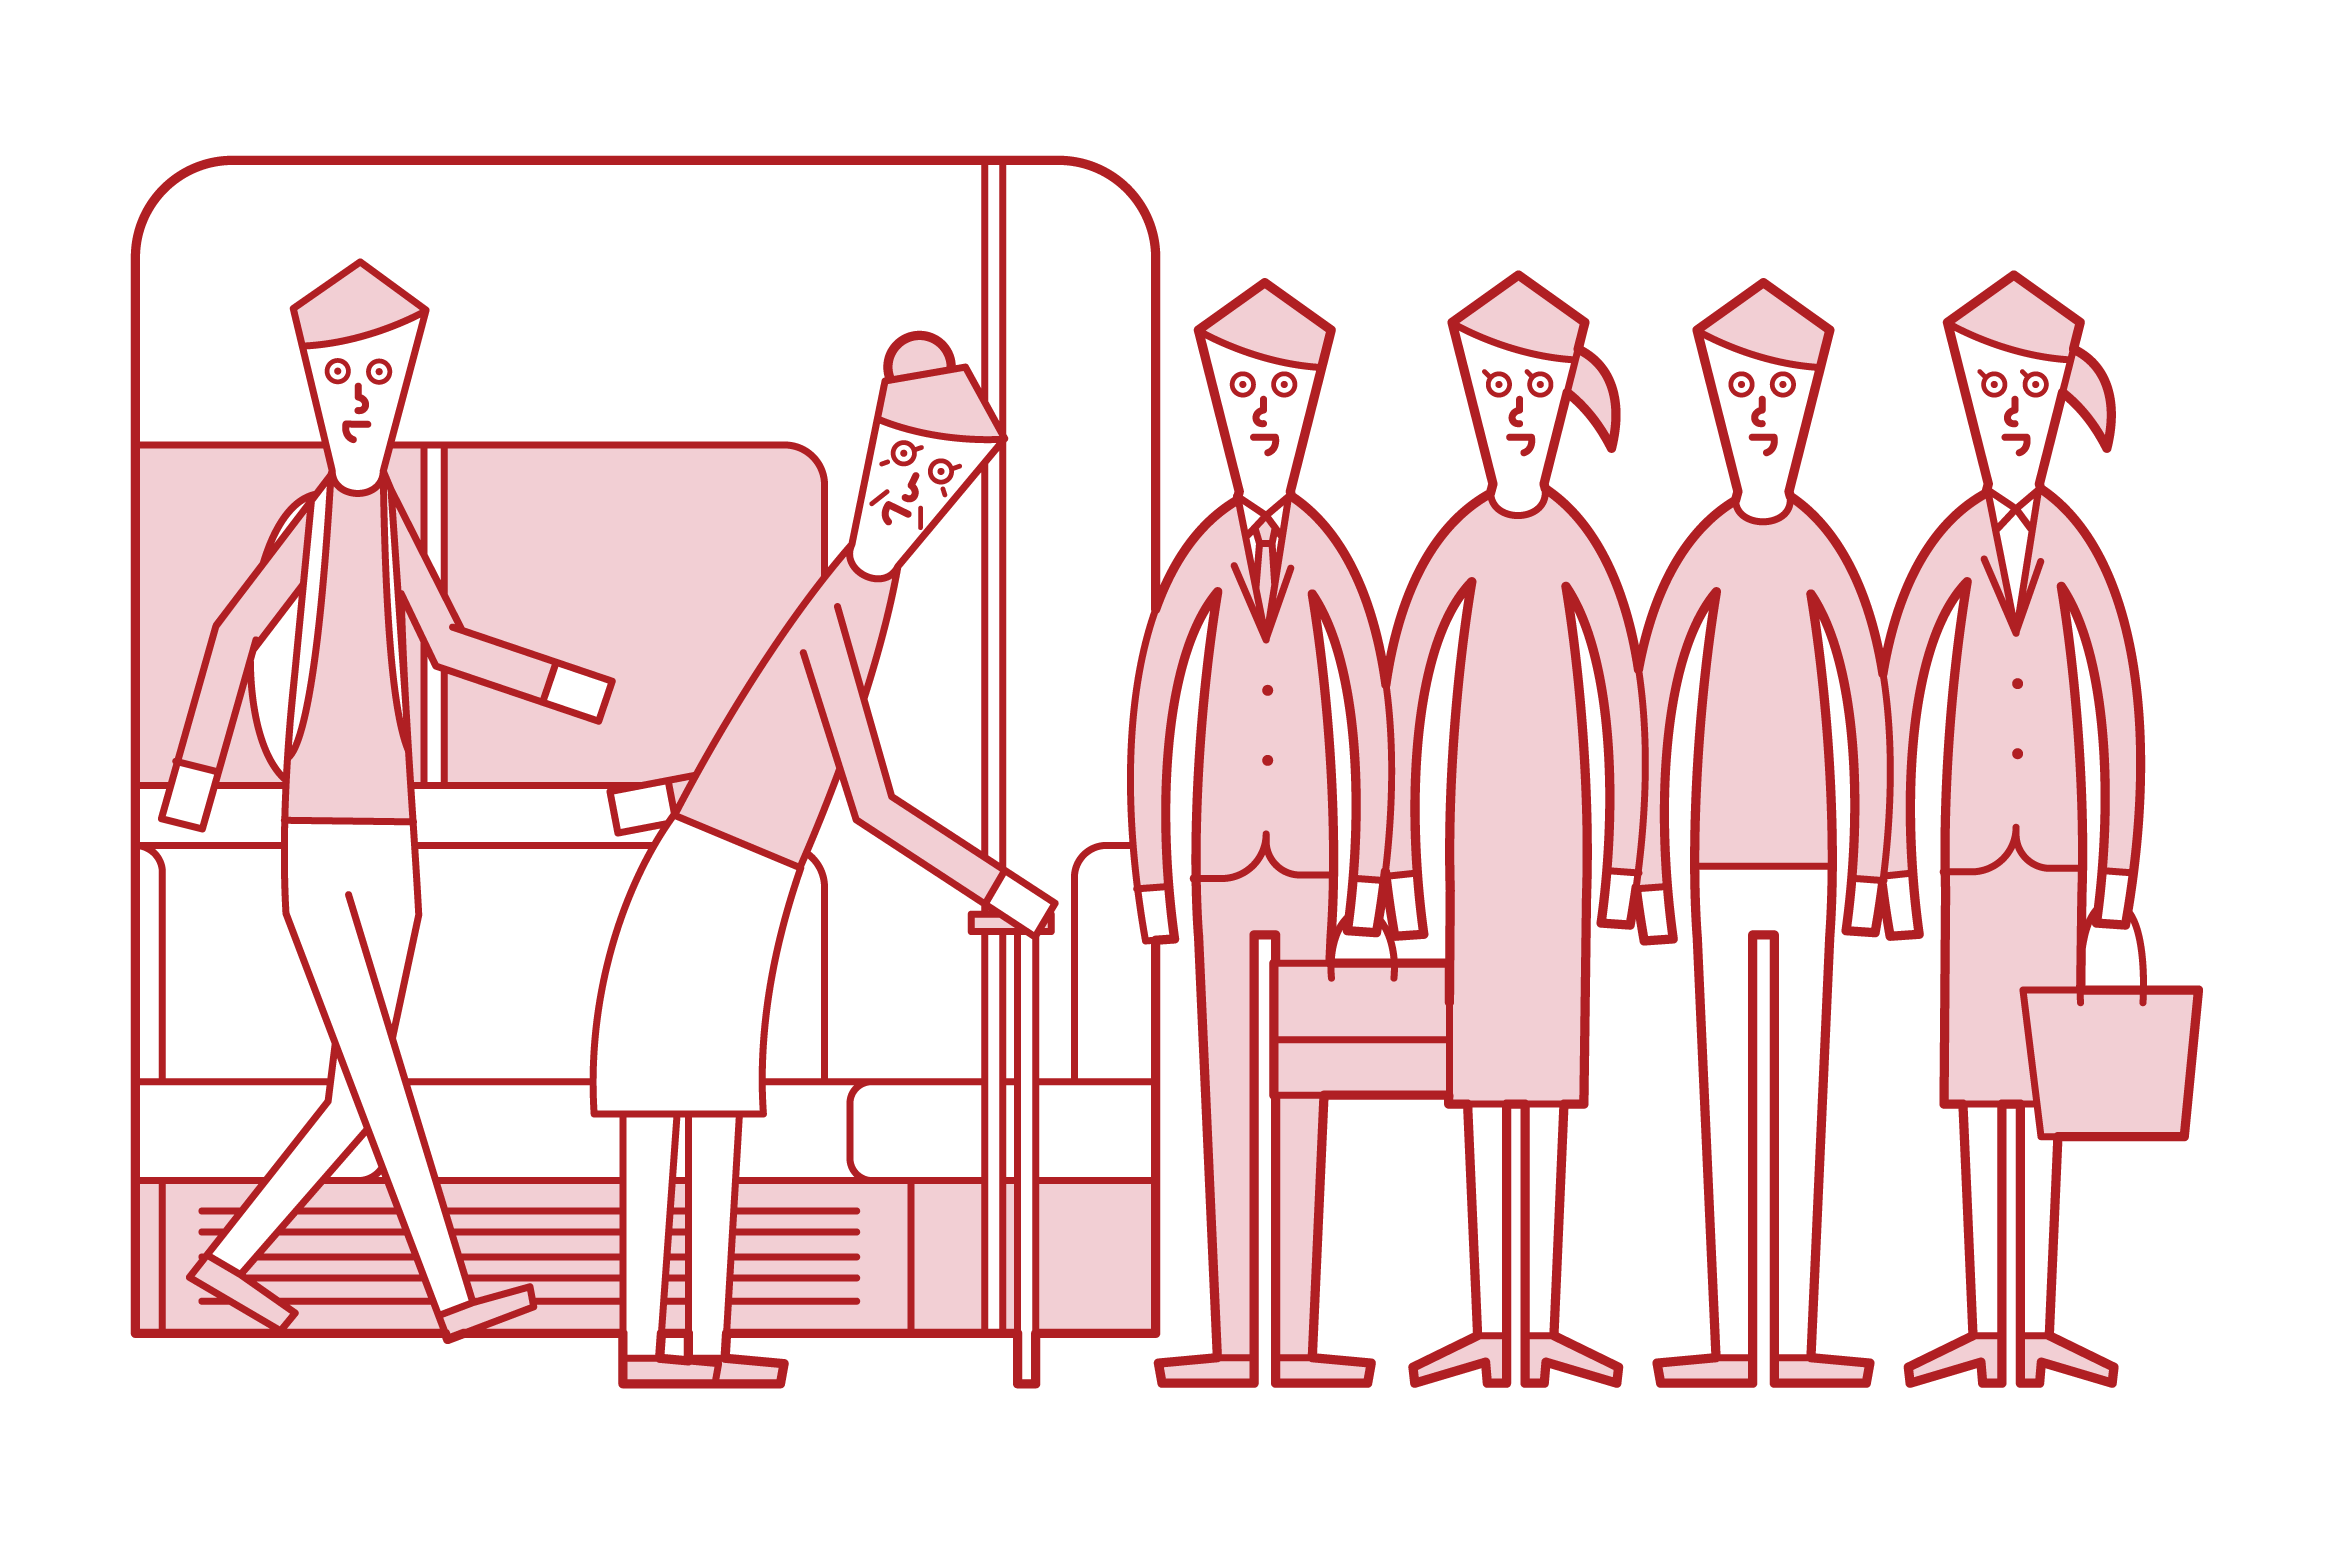 Illustration of passenger prioritizing people who get off the train